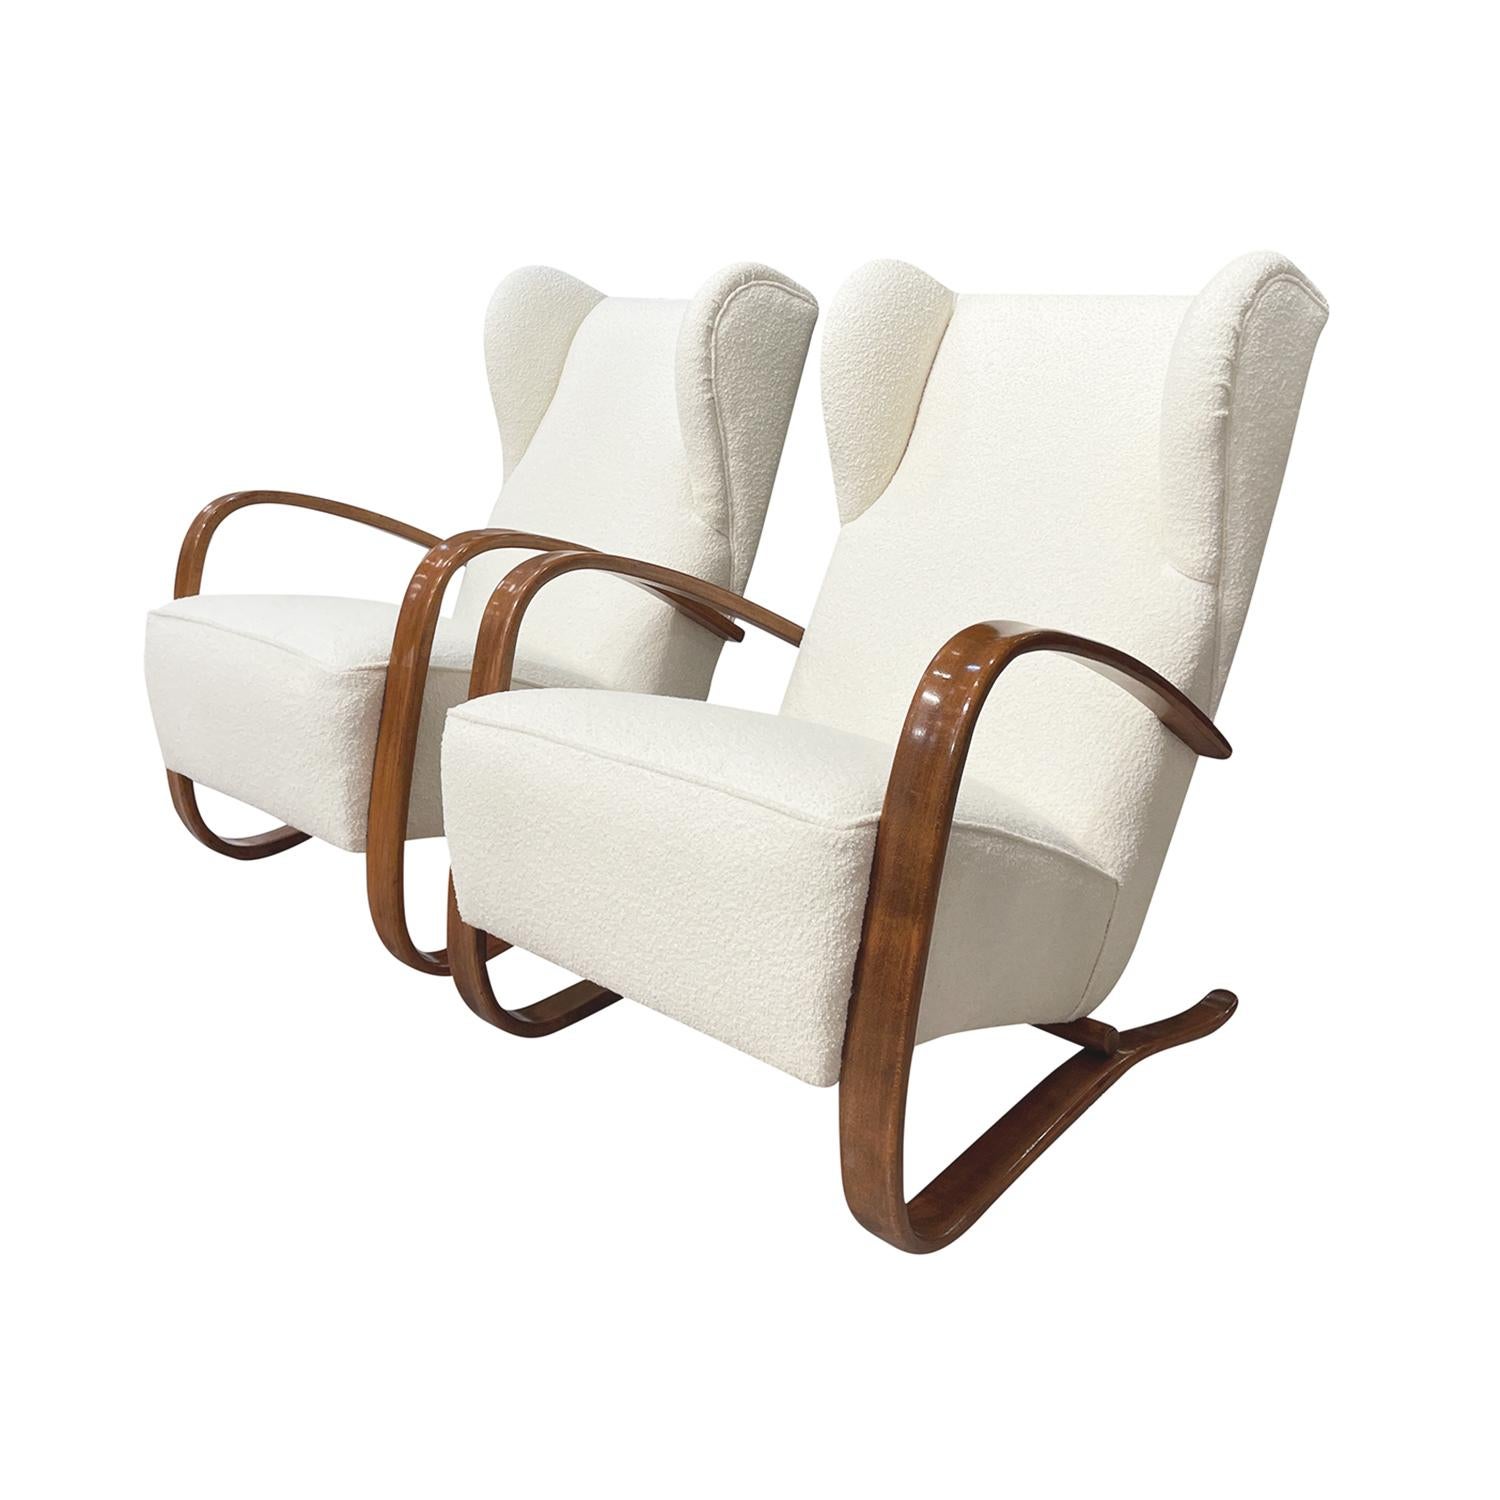 Polished 20th Century Czech Pair of Mahogany H269 Lounge Chairs by Jindrich Halabala For Sale